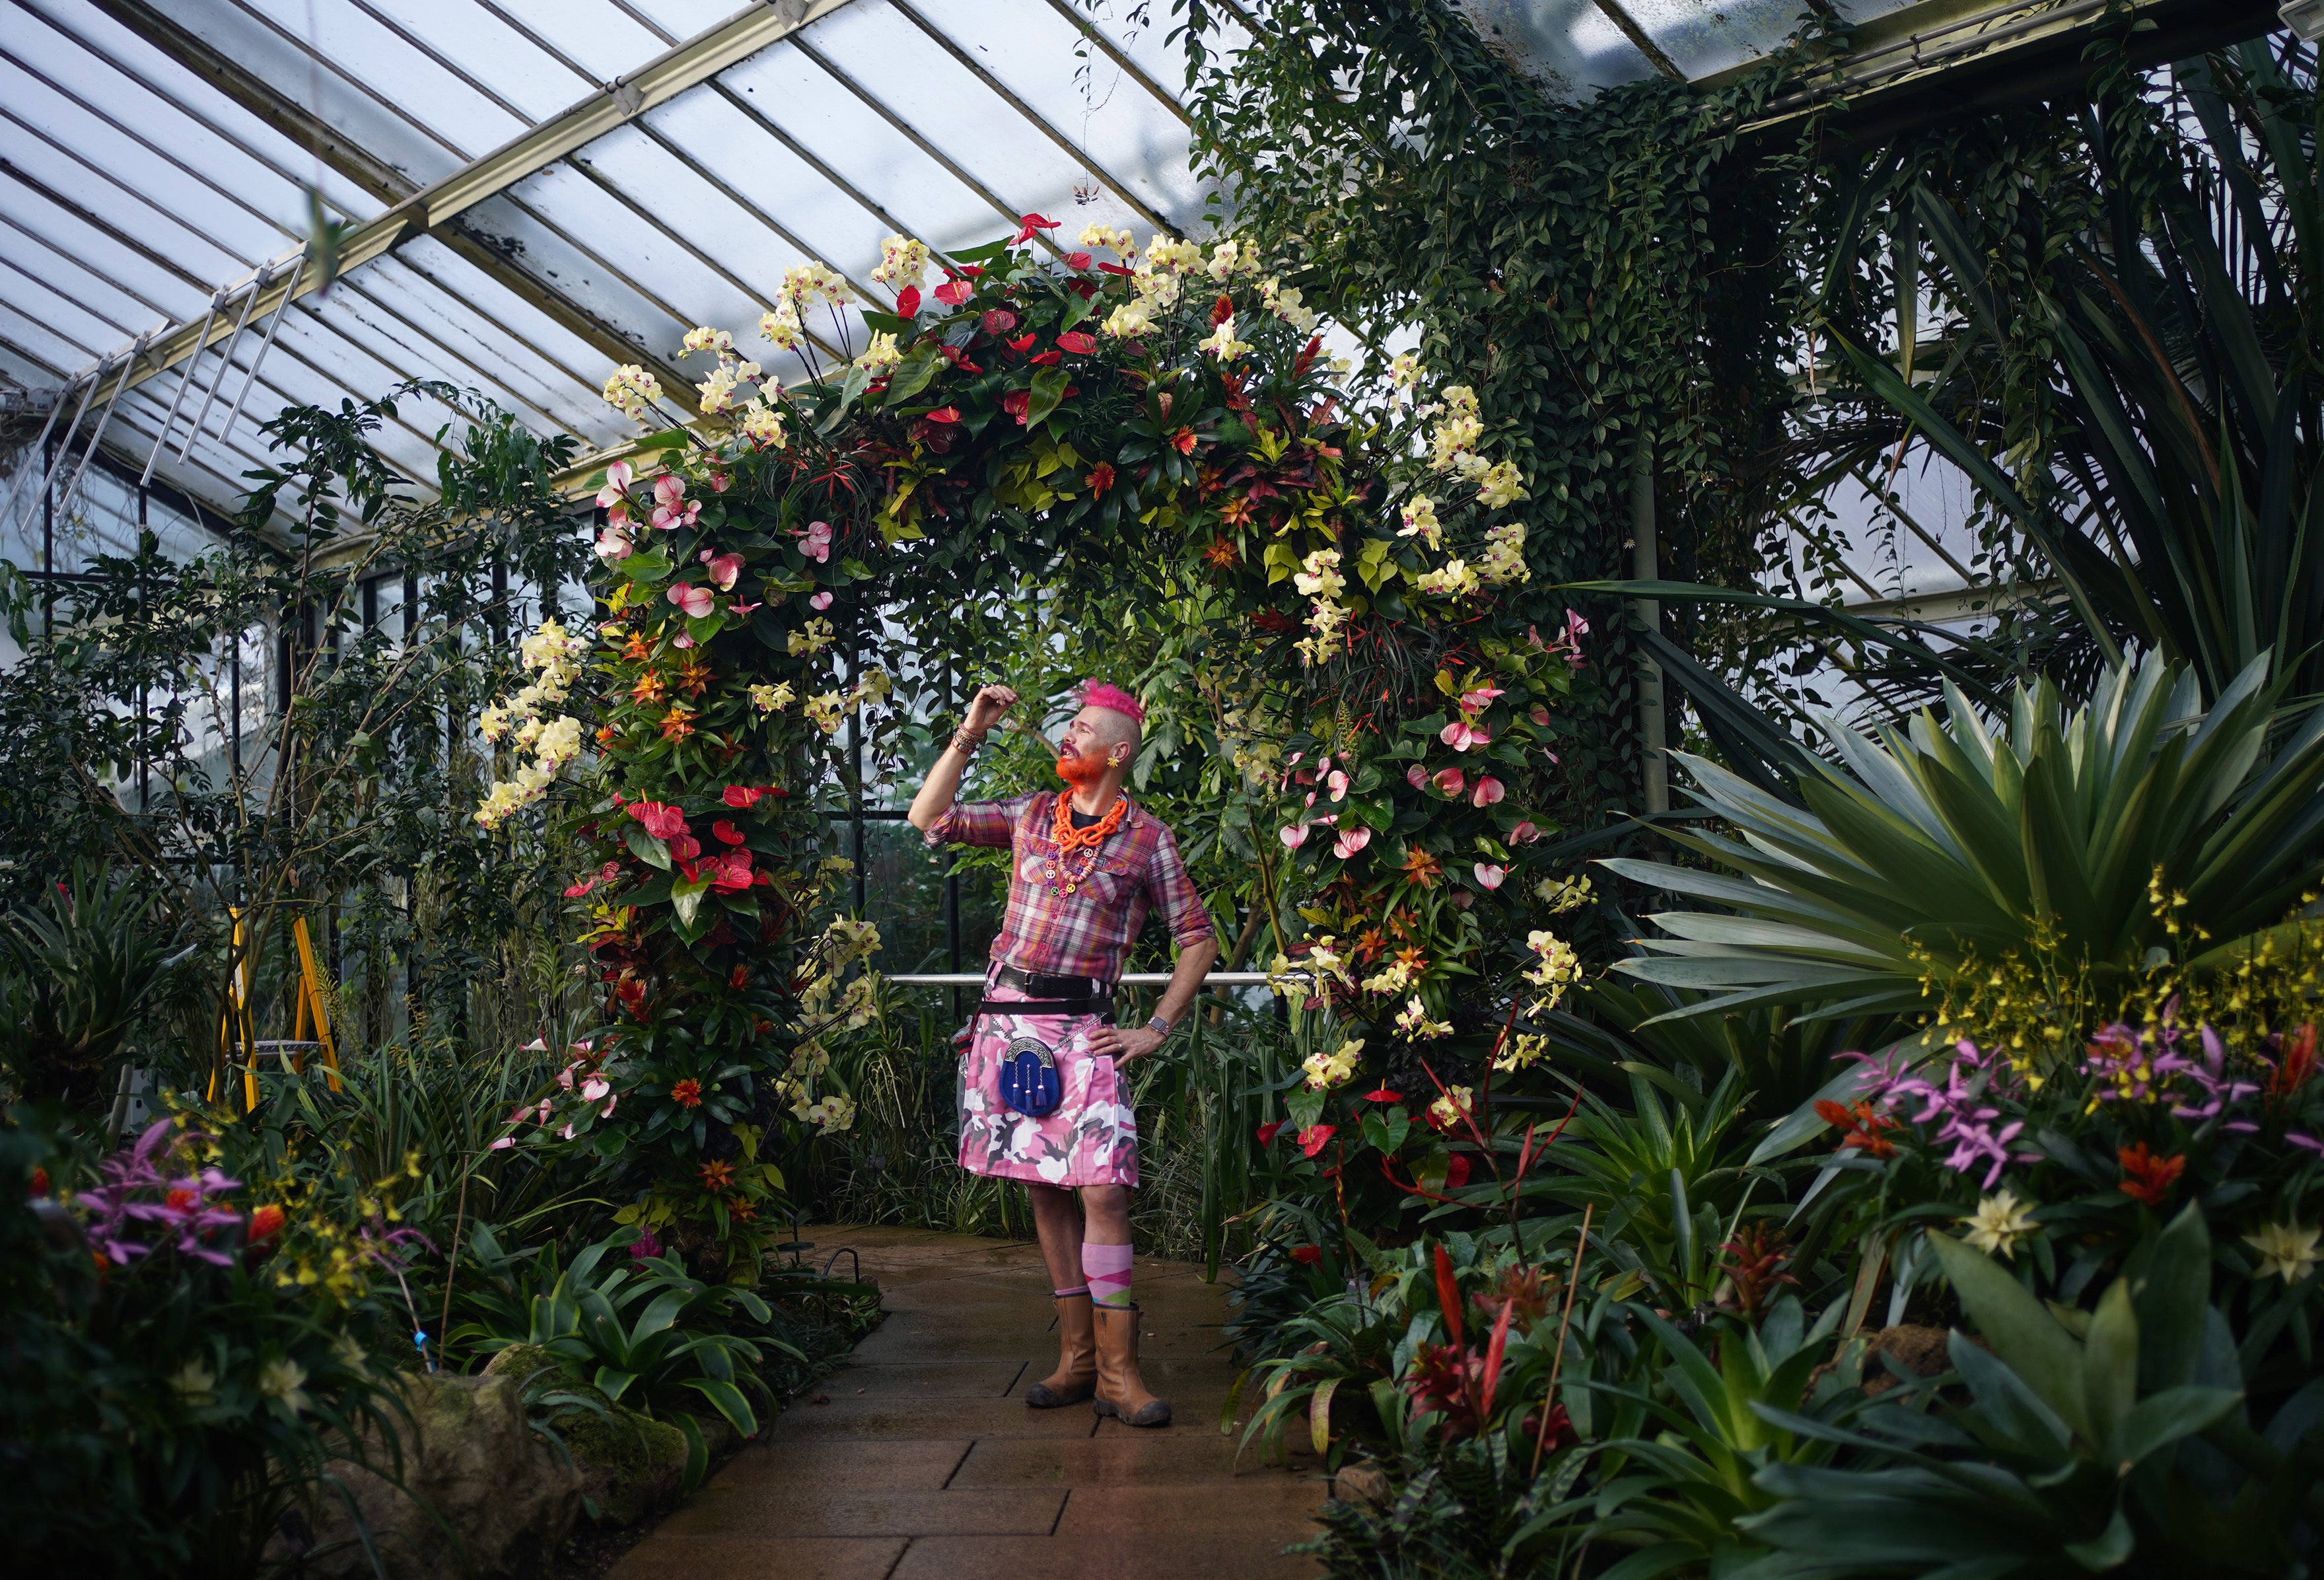 Henck Roling, in-house florist at Kew, poses with a display at the Kew Orchid Festival (Yui Mok/PA)